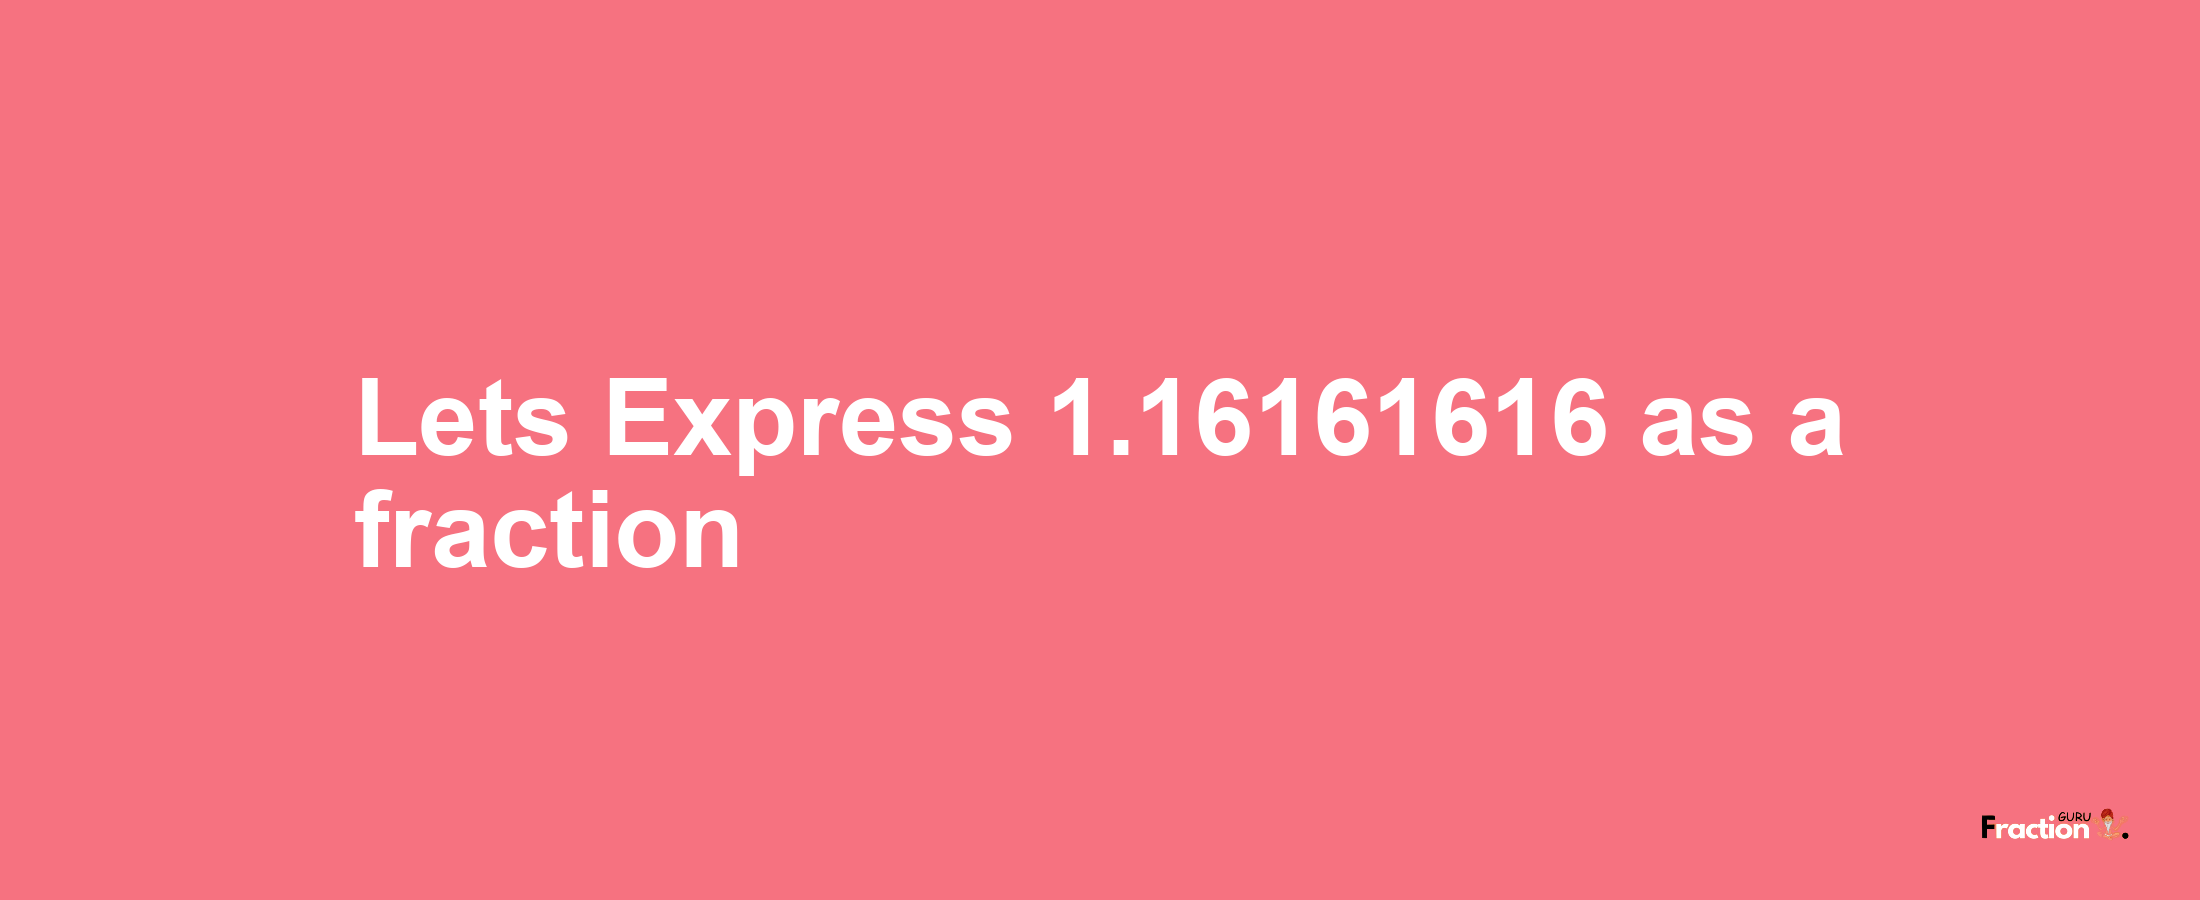 Lets Express 1.16161616 as afraction